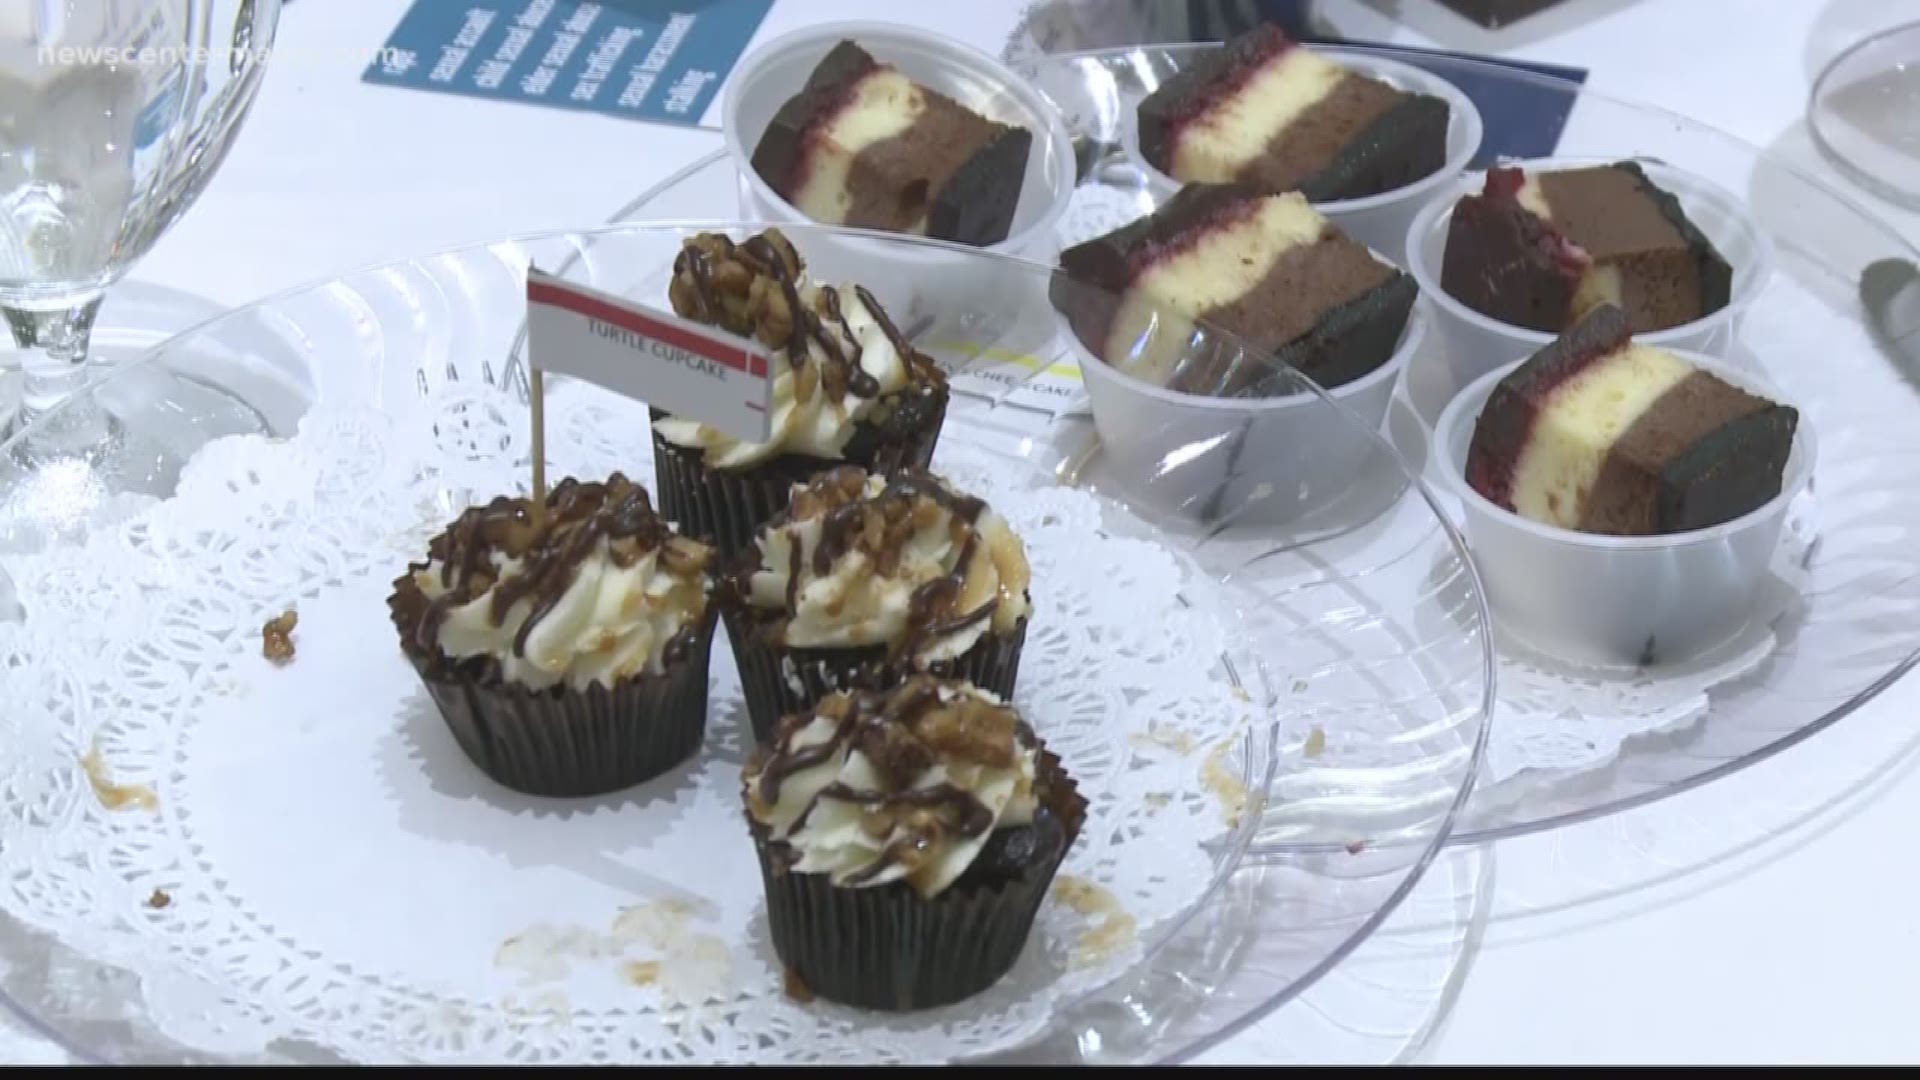 The Sexual Assault Response Services hosts the Chocolate Lovers Fling